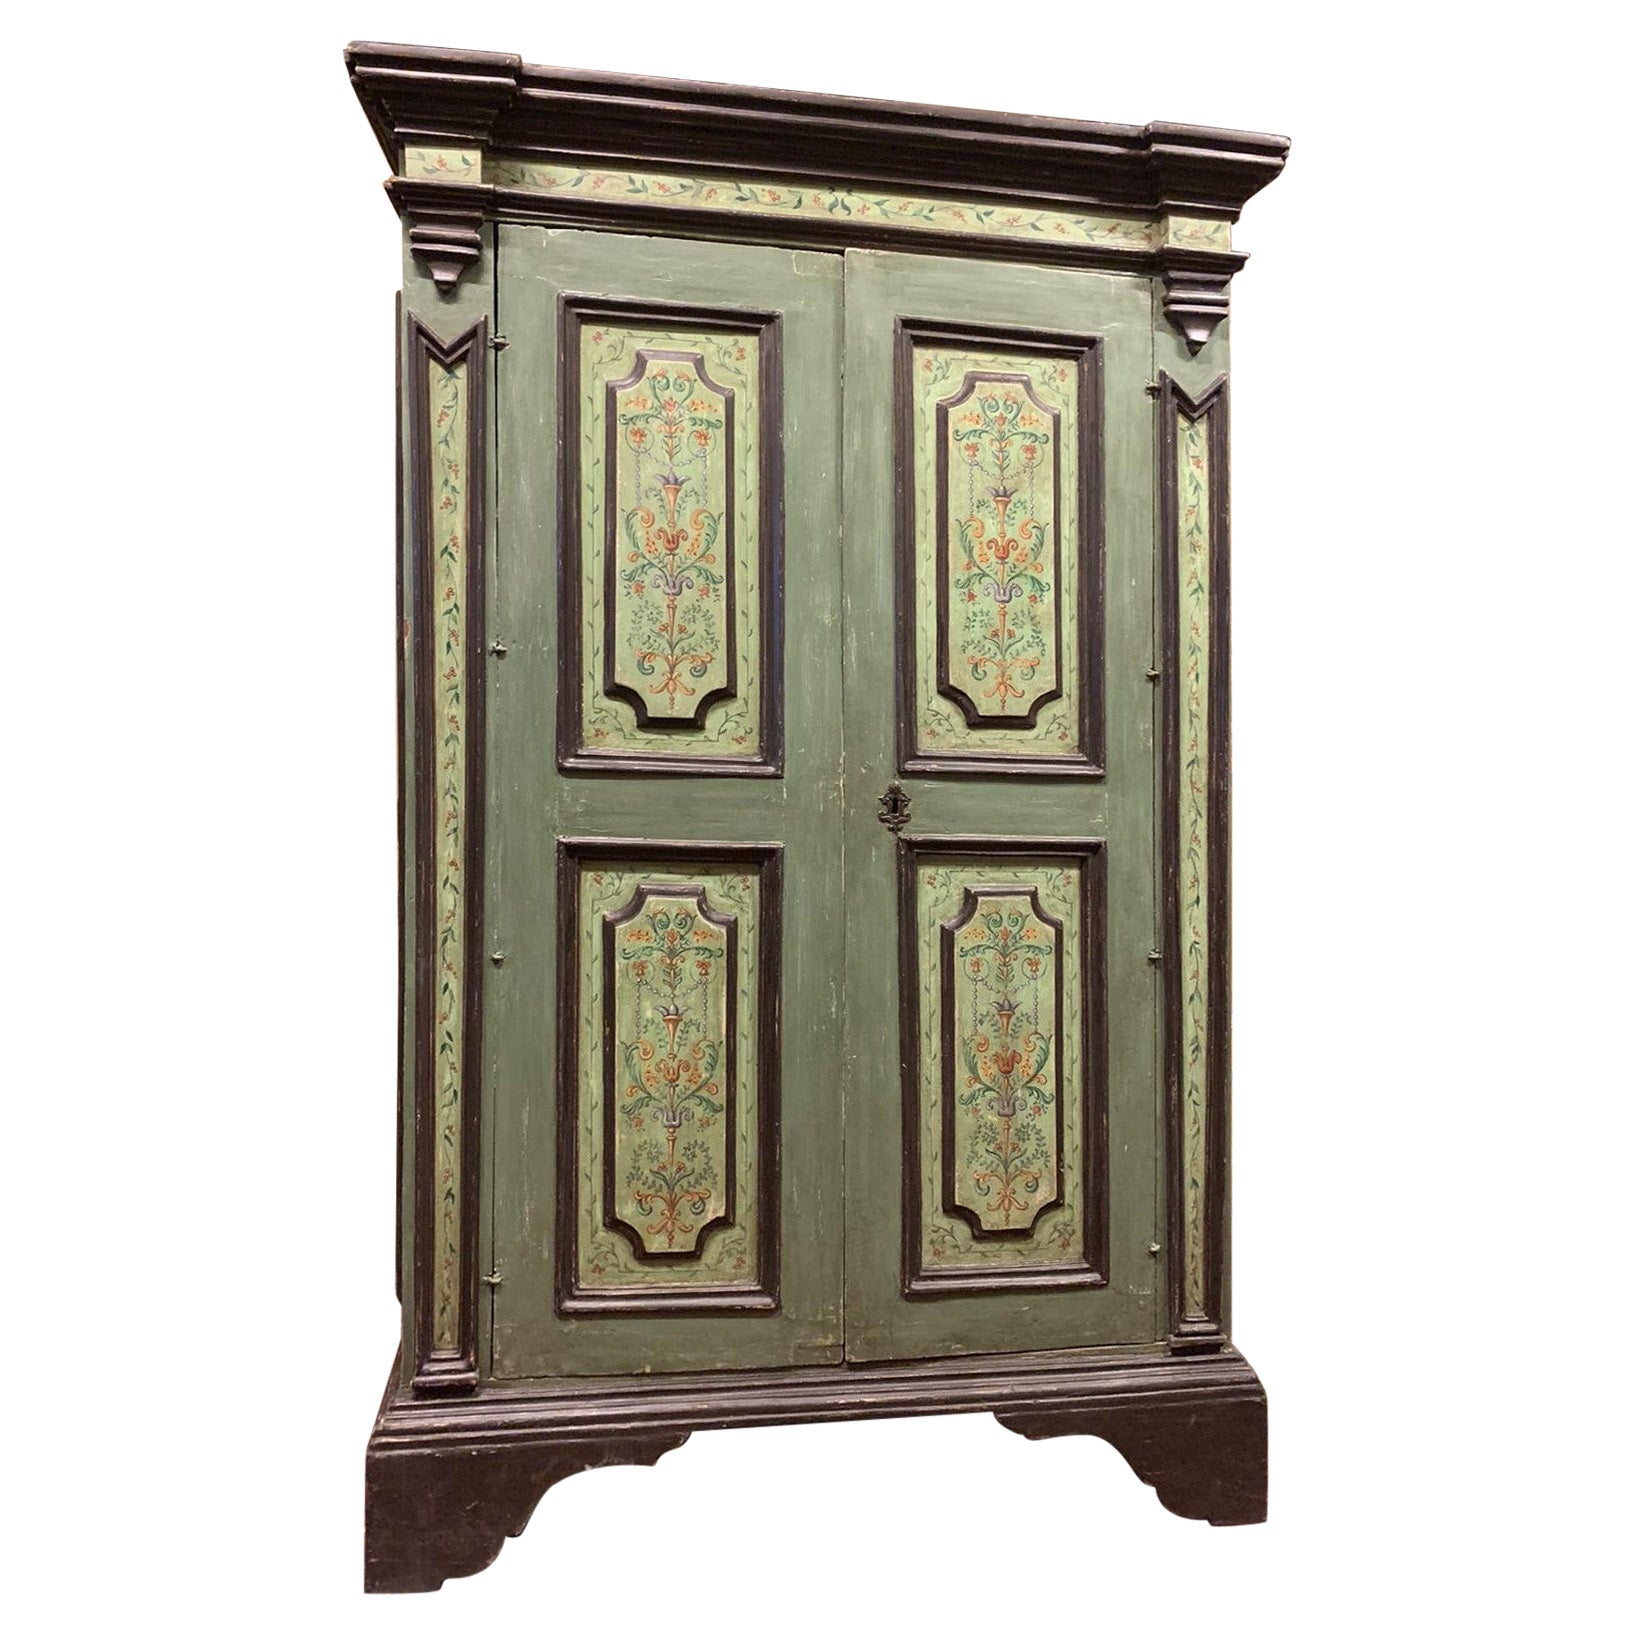 Antique Blue / Green Painted Double Door Wardrobe Cabinets, 18th Century, Italy